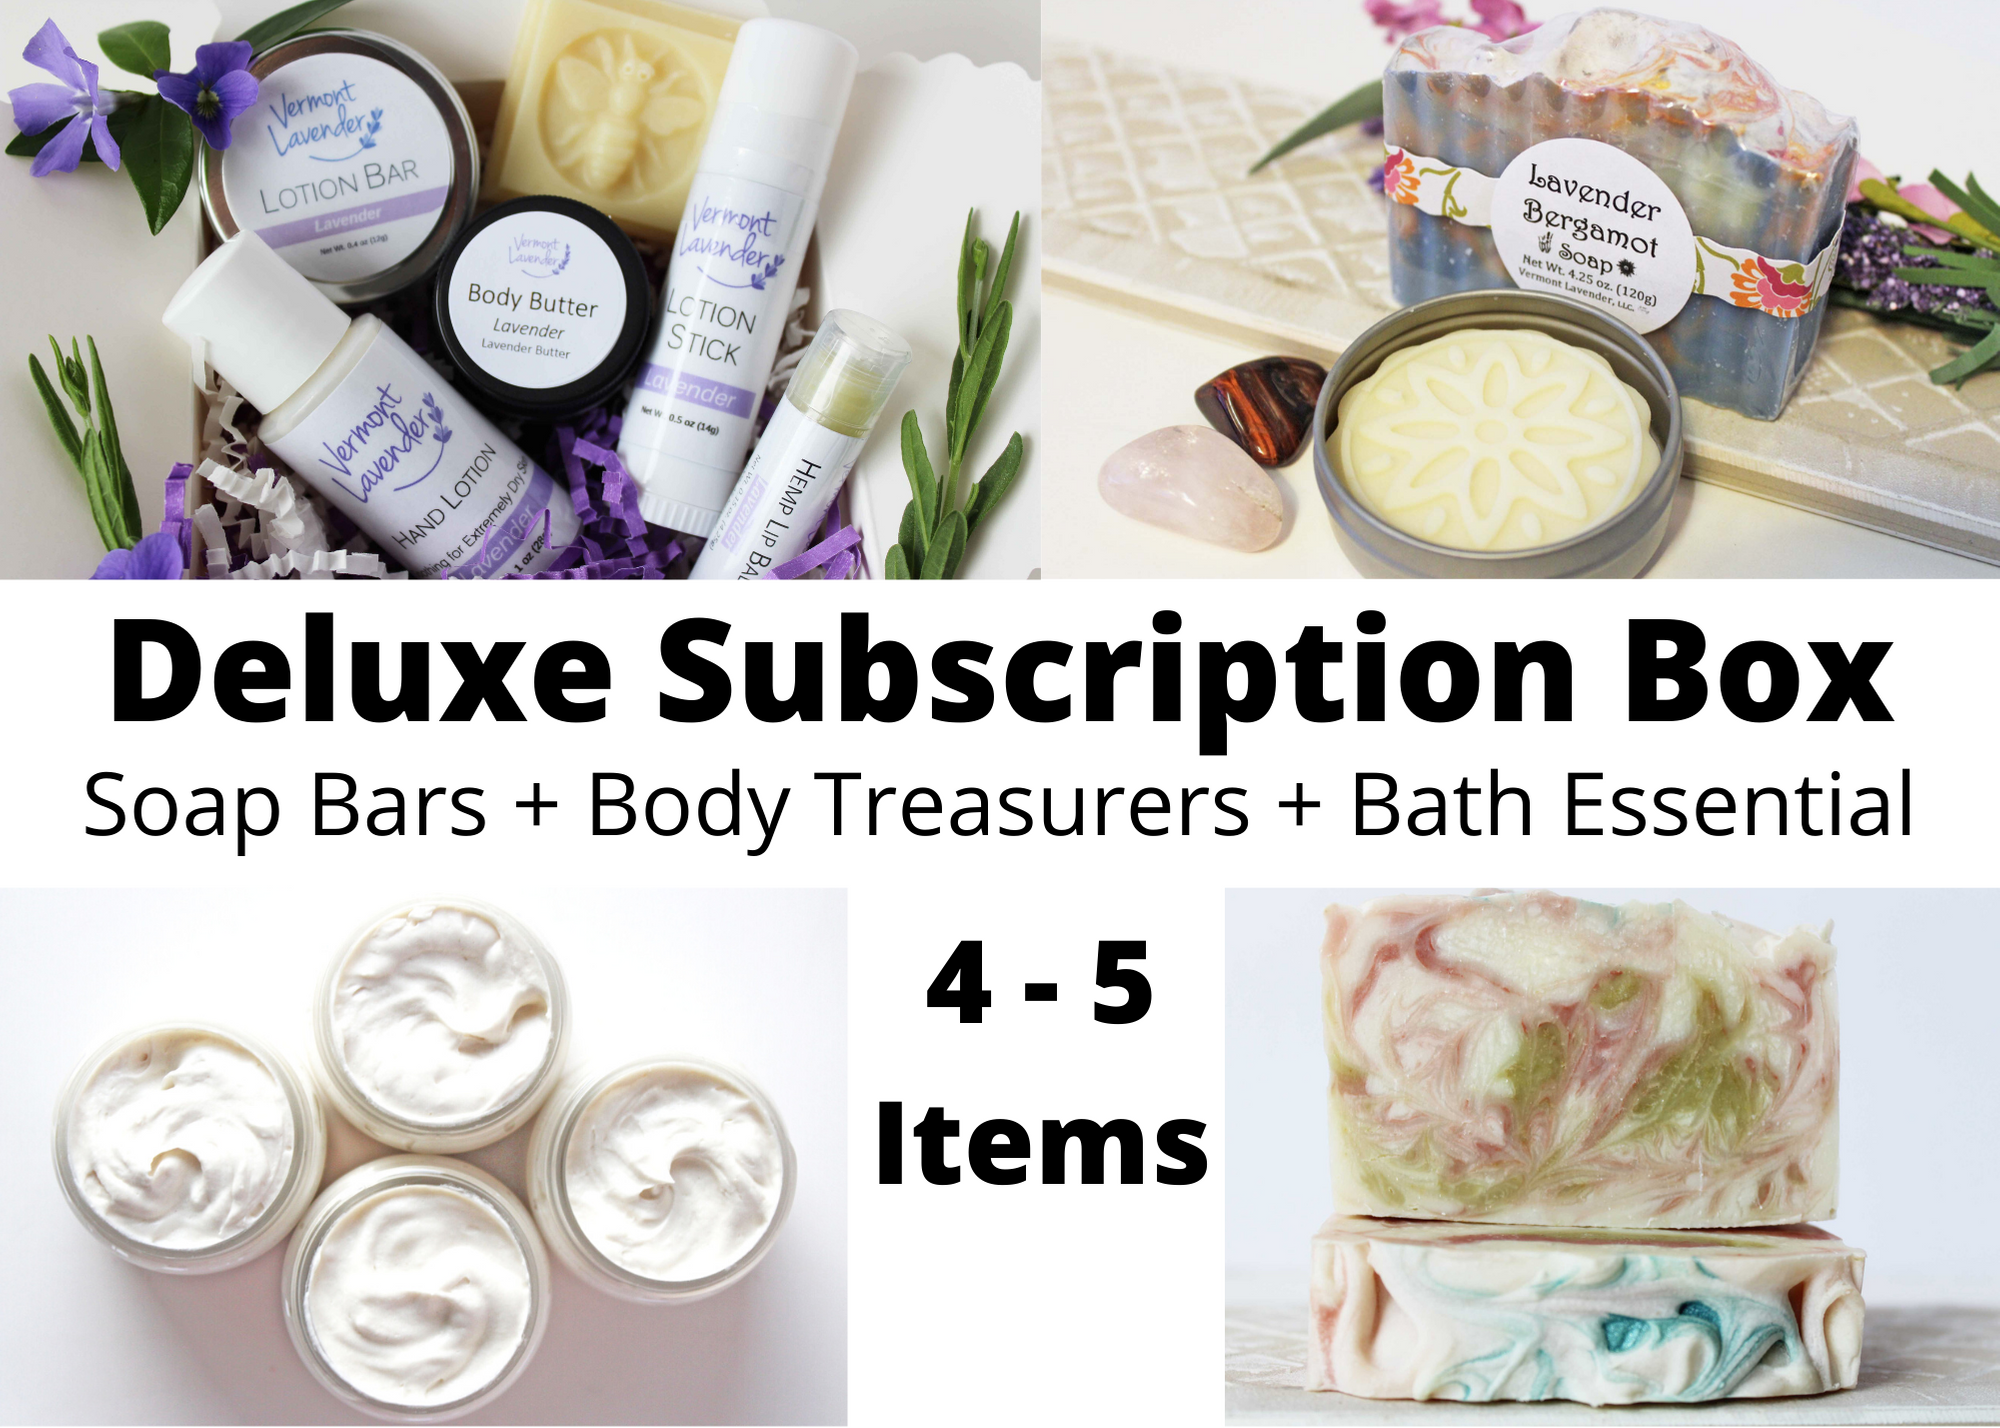 Duluxed monthly subscription box offer